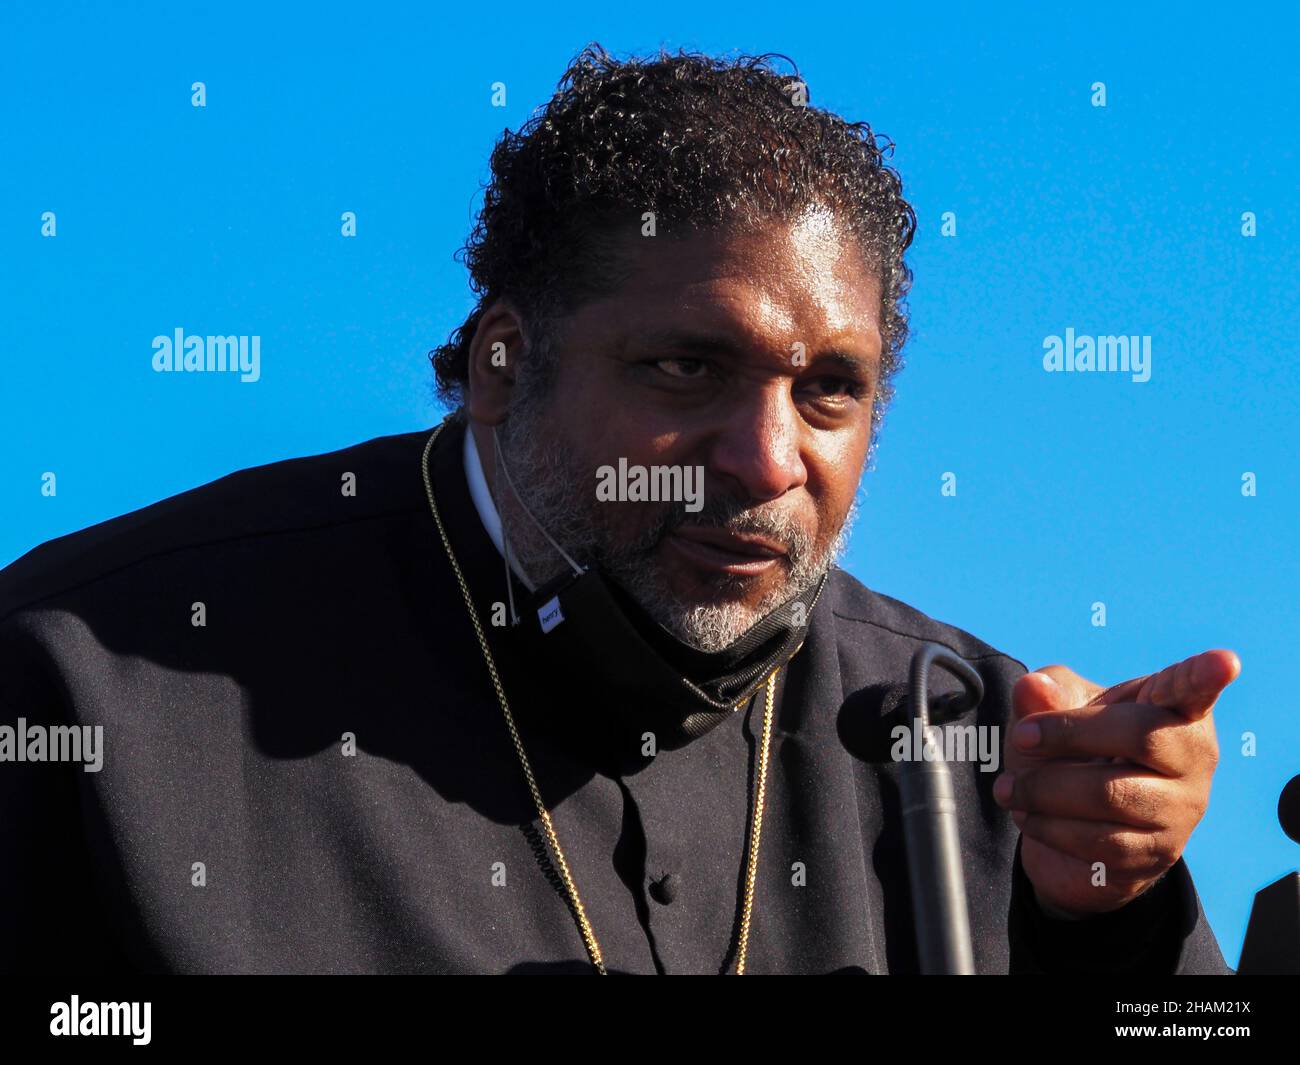 December 13, 2021, Washington, District of Columbia, USA: At the 'Get it Done in 2021' rally, the Reverend Dr. William J. Barber II, co-chair of the Poor PeopleÃs Campaign, called for the Senate to stop stonewalling and pass voting rights protections and the Build Back Better plan before the end of December. (Credit Image: © Sue Dorfman/ZUMA Press Wire) Stock Photo